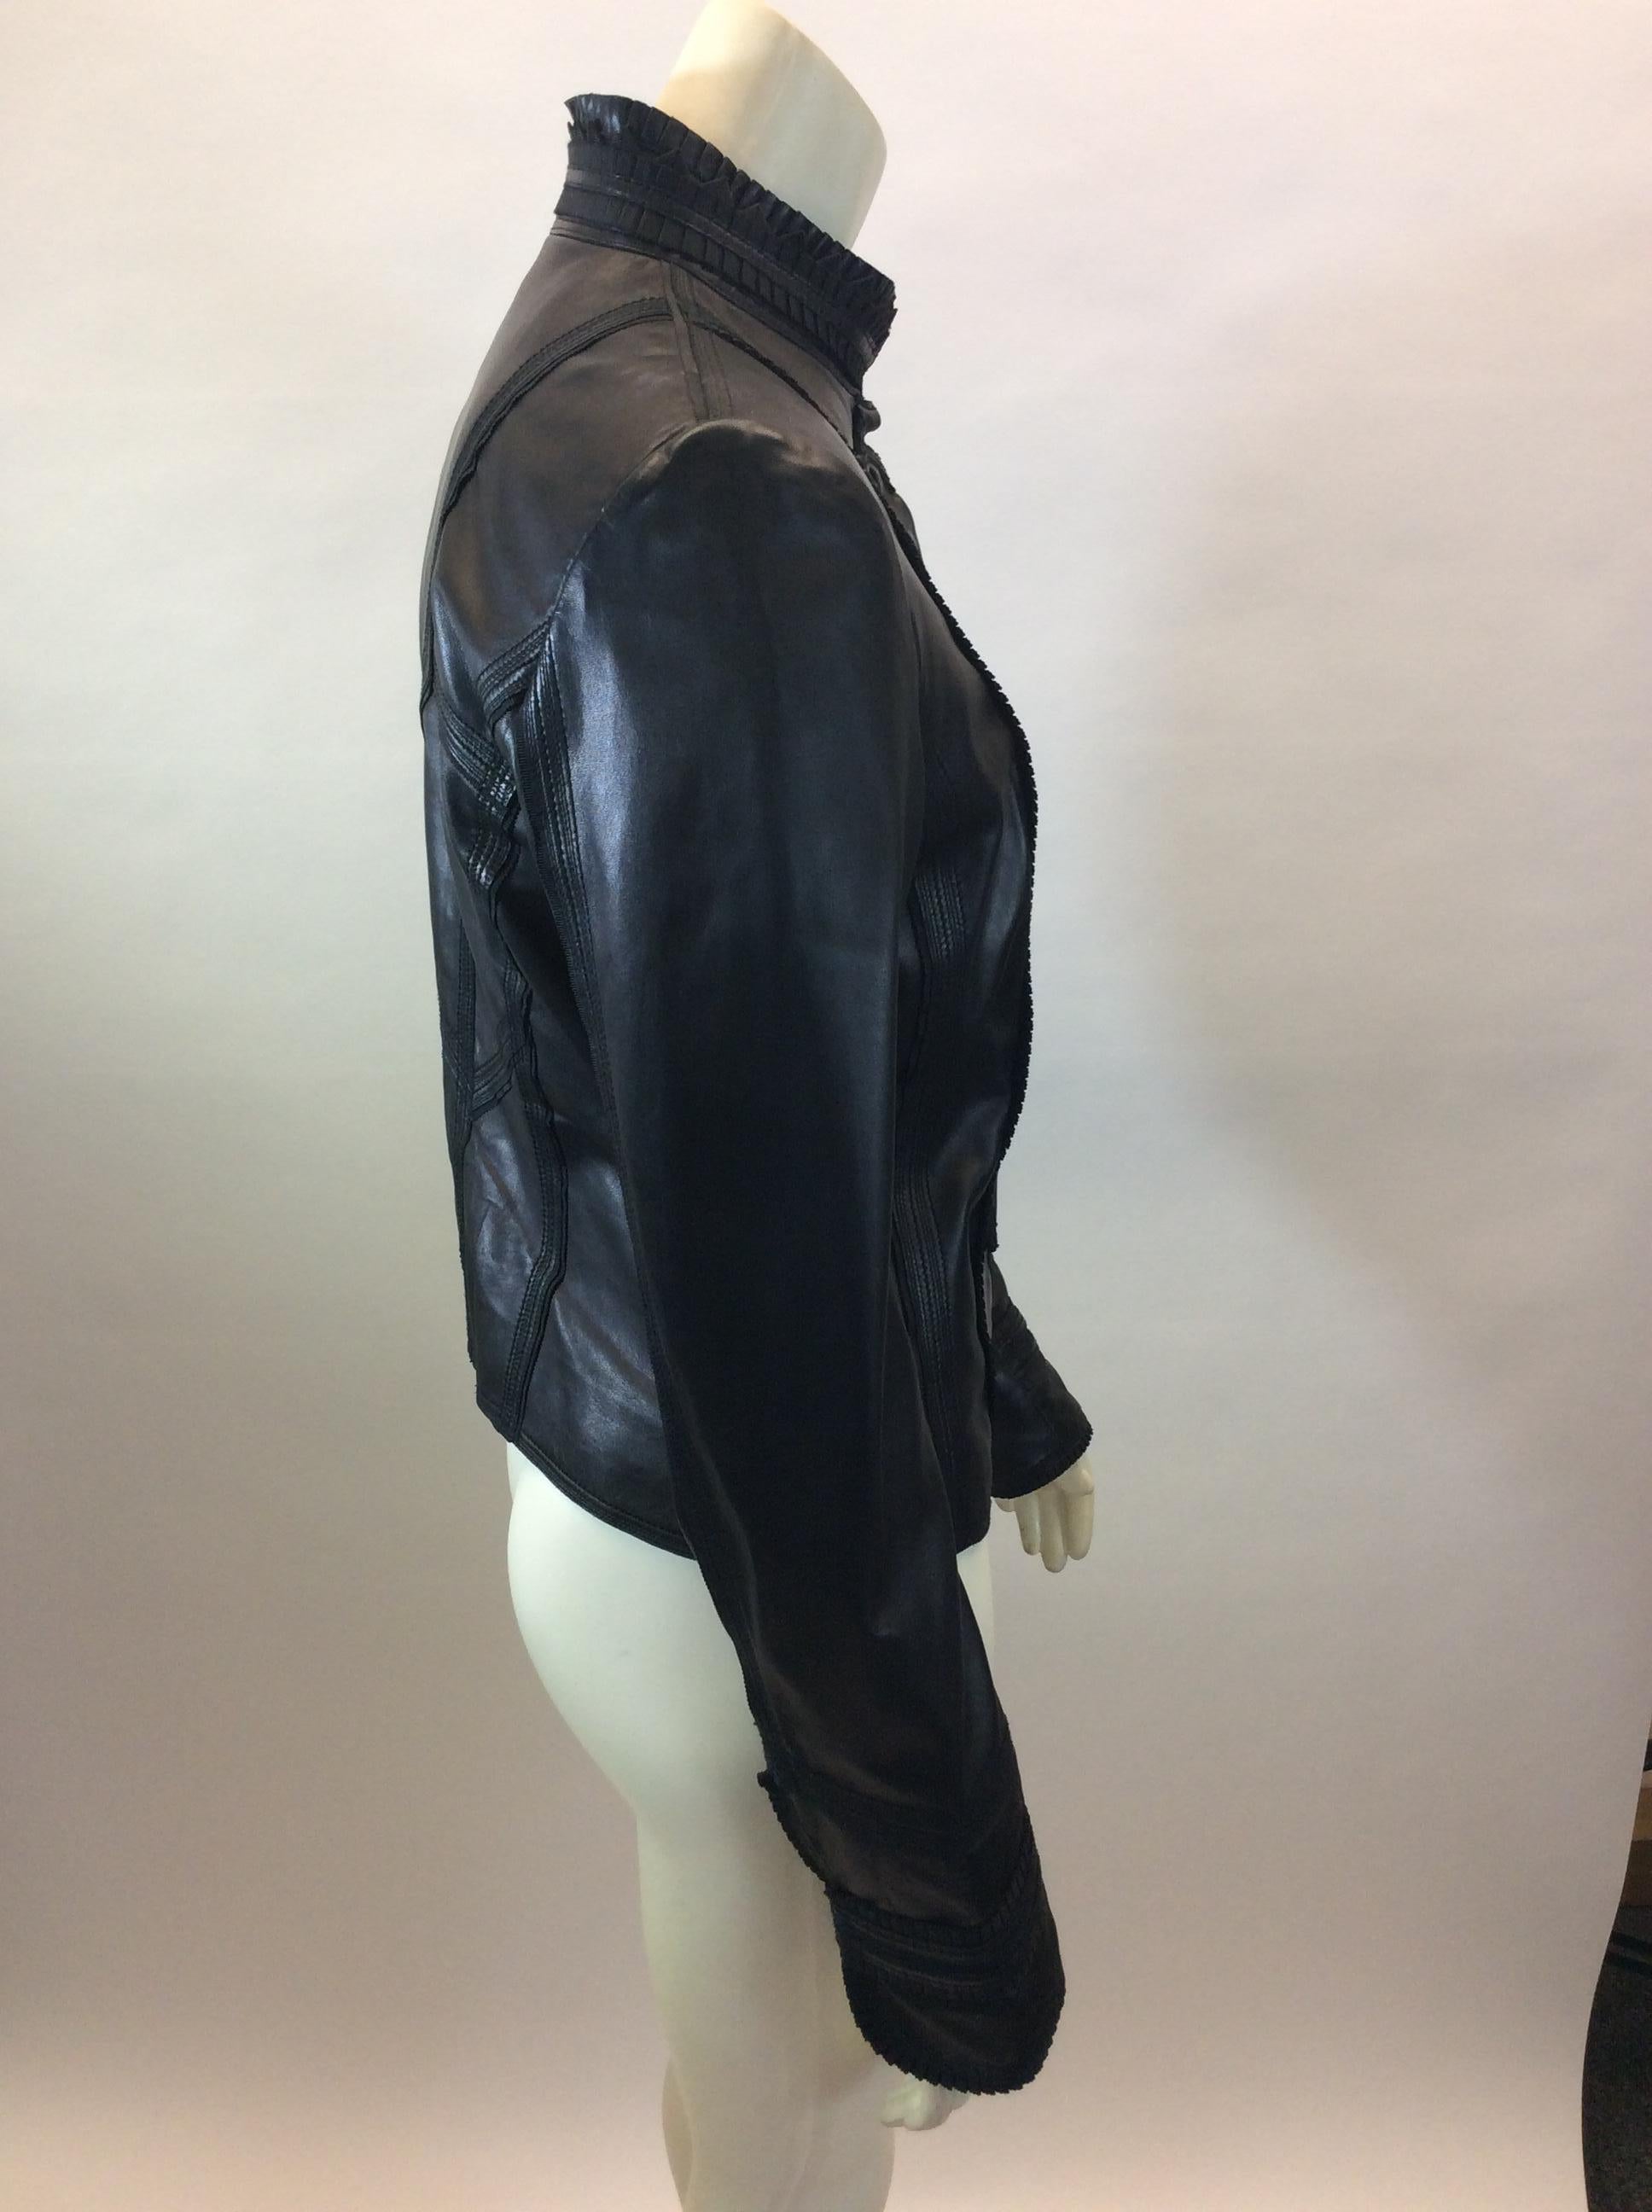 Elie Tahari Black Leather Jacket In Good Condition For Sale In Narberth, PA